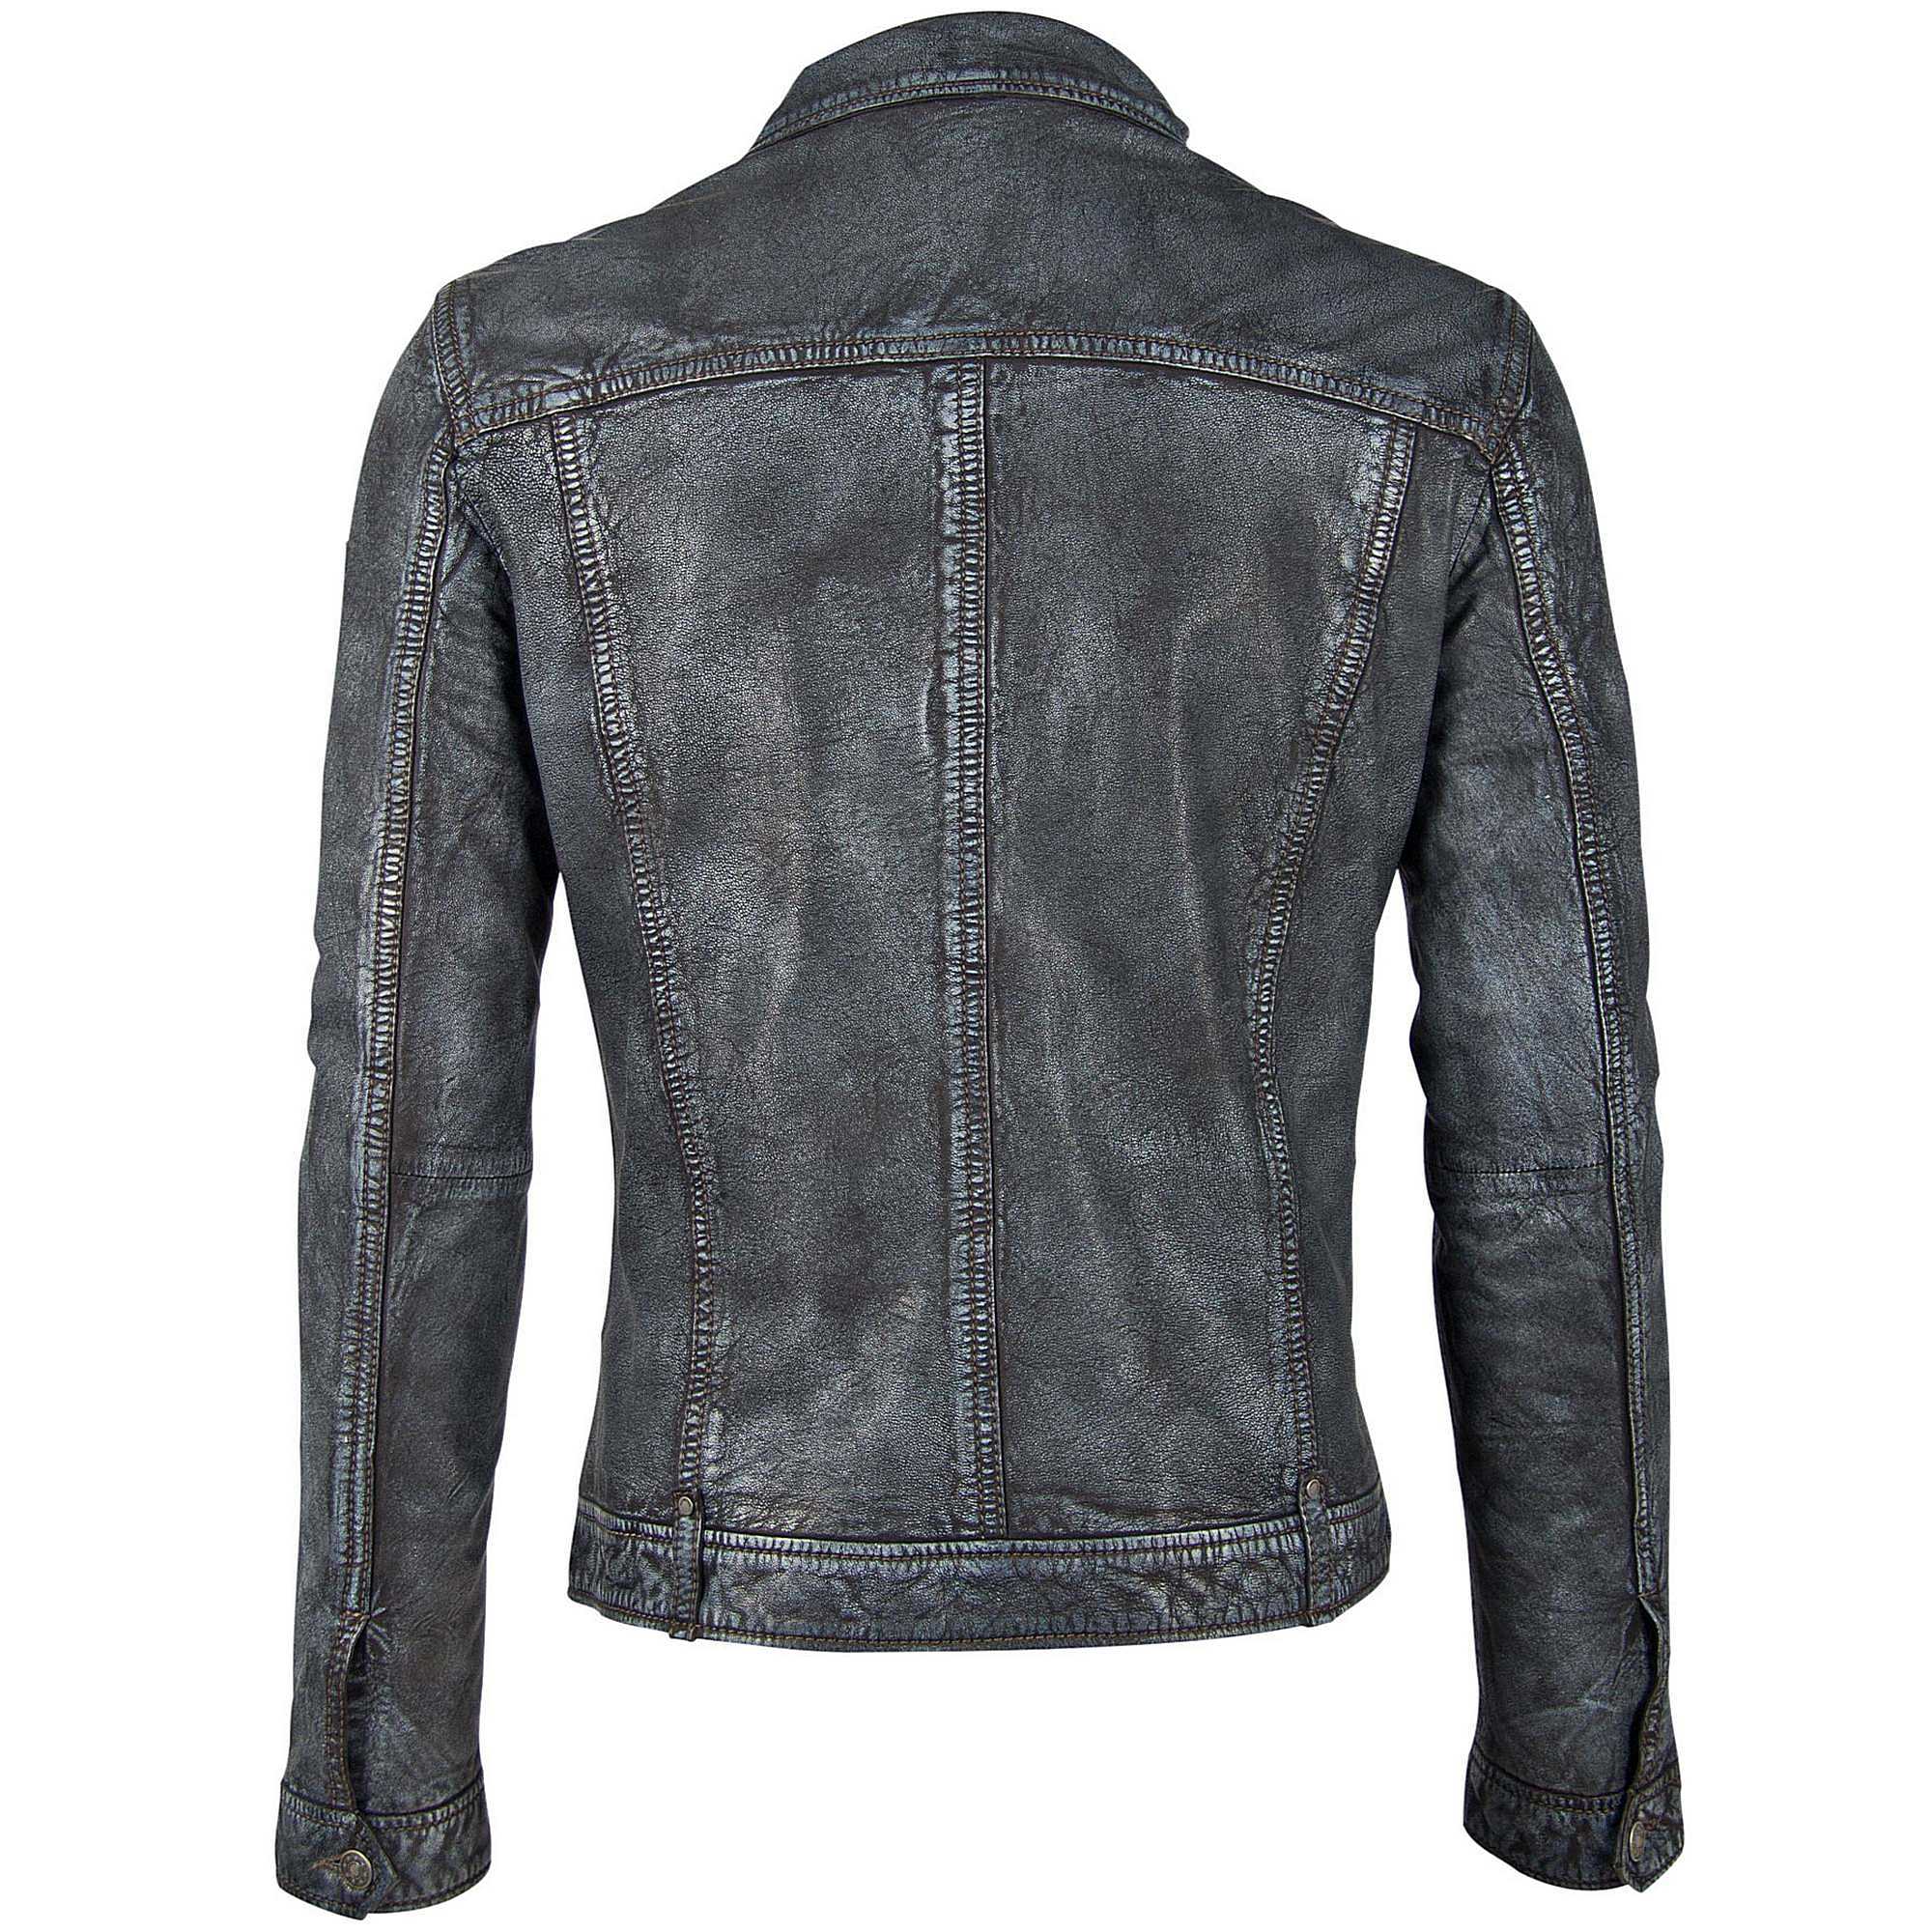 Geoff RF Leather Jacket, – Anthracite-Blue mauritiusleather